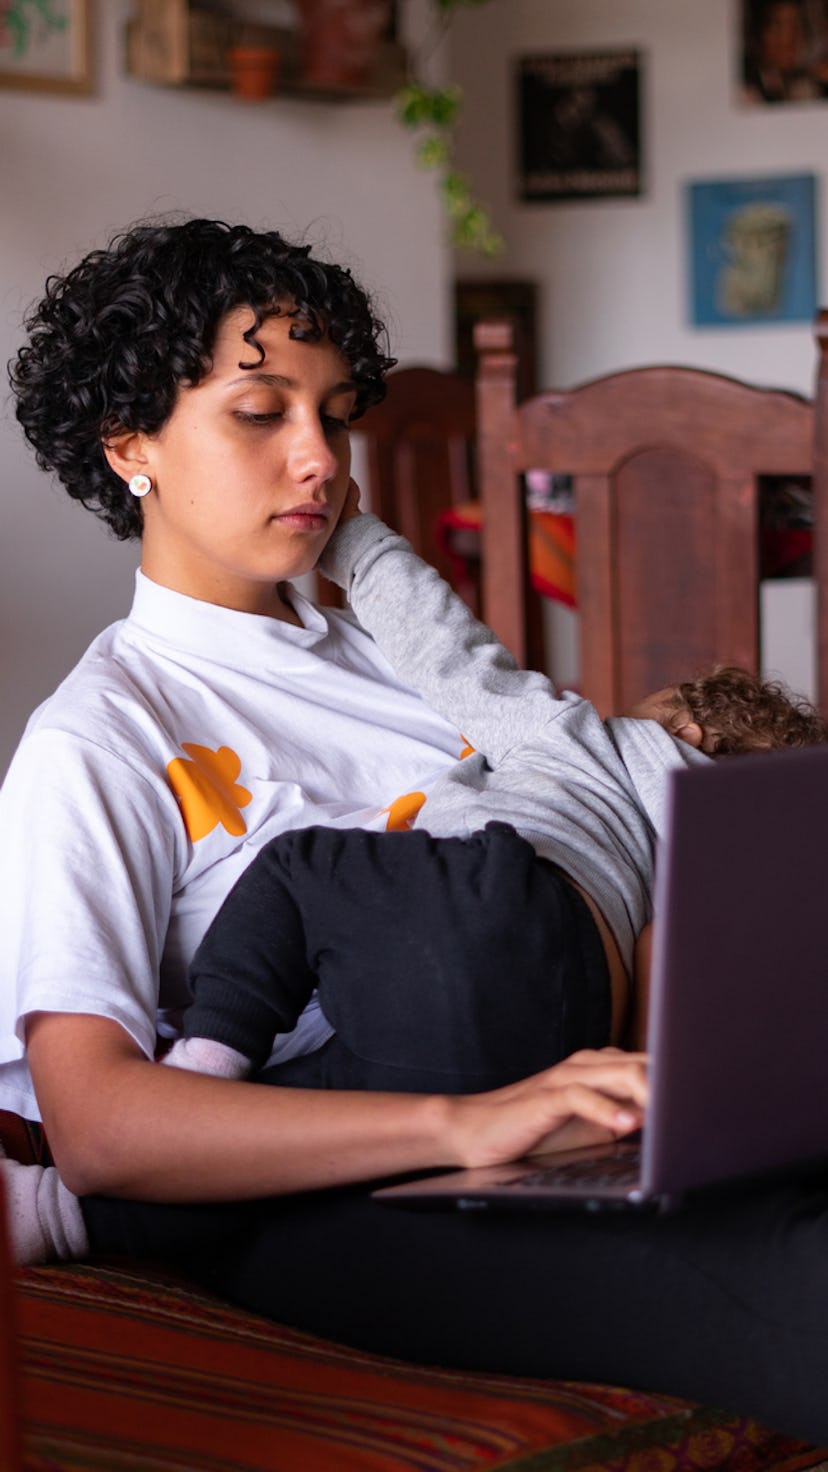 A woman working from home after having a baby.